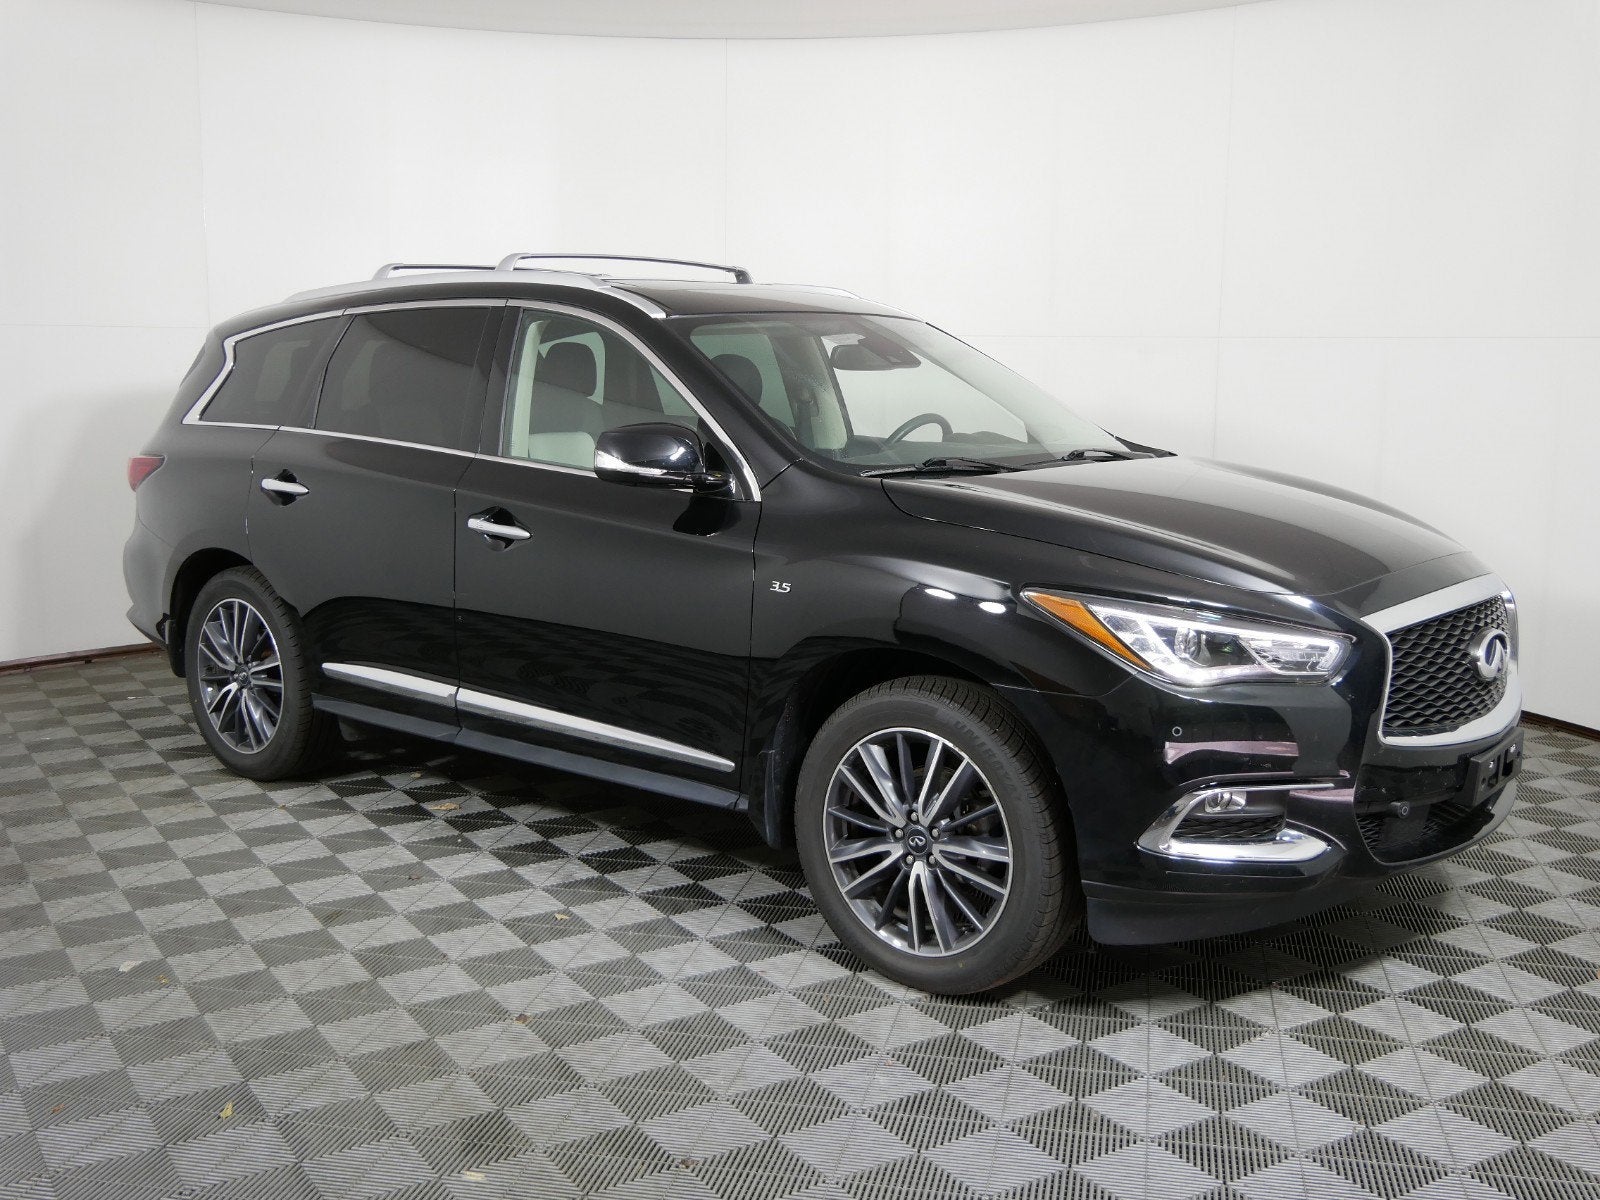 Used 2020 INFINITI QX60 SIGNATURE EDITION with VIN 5N1DL0MM1LC544902 for sale in Minneapolis, Minnesota